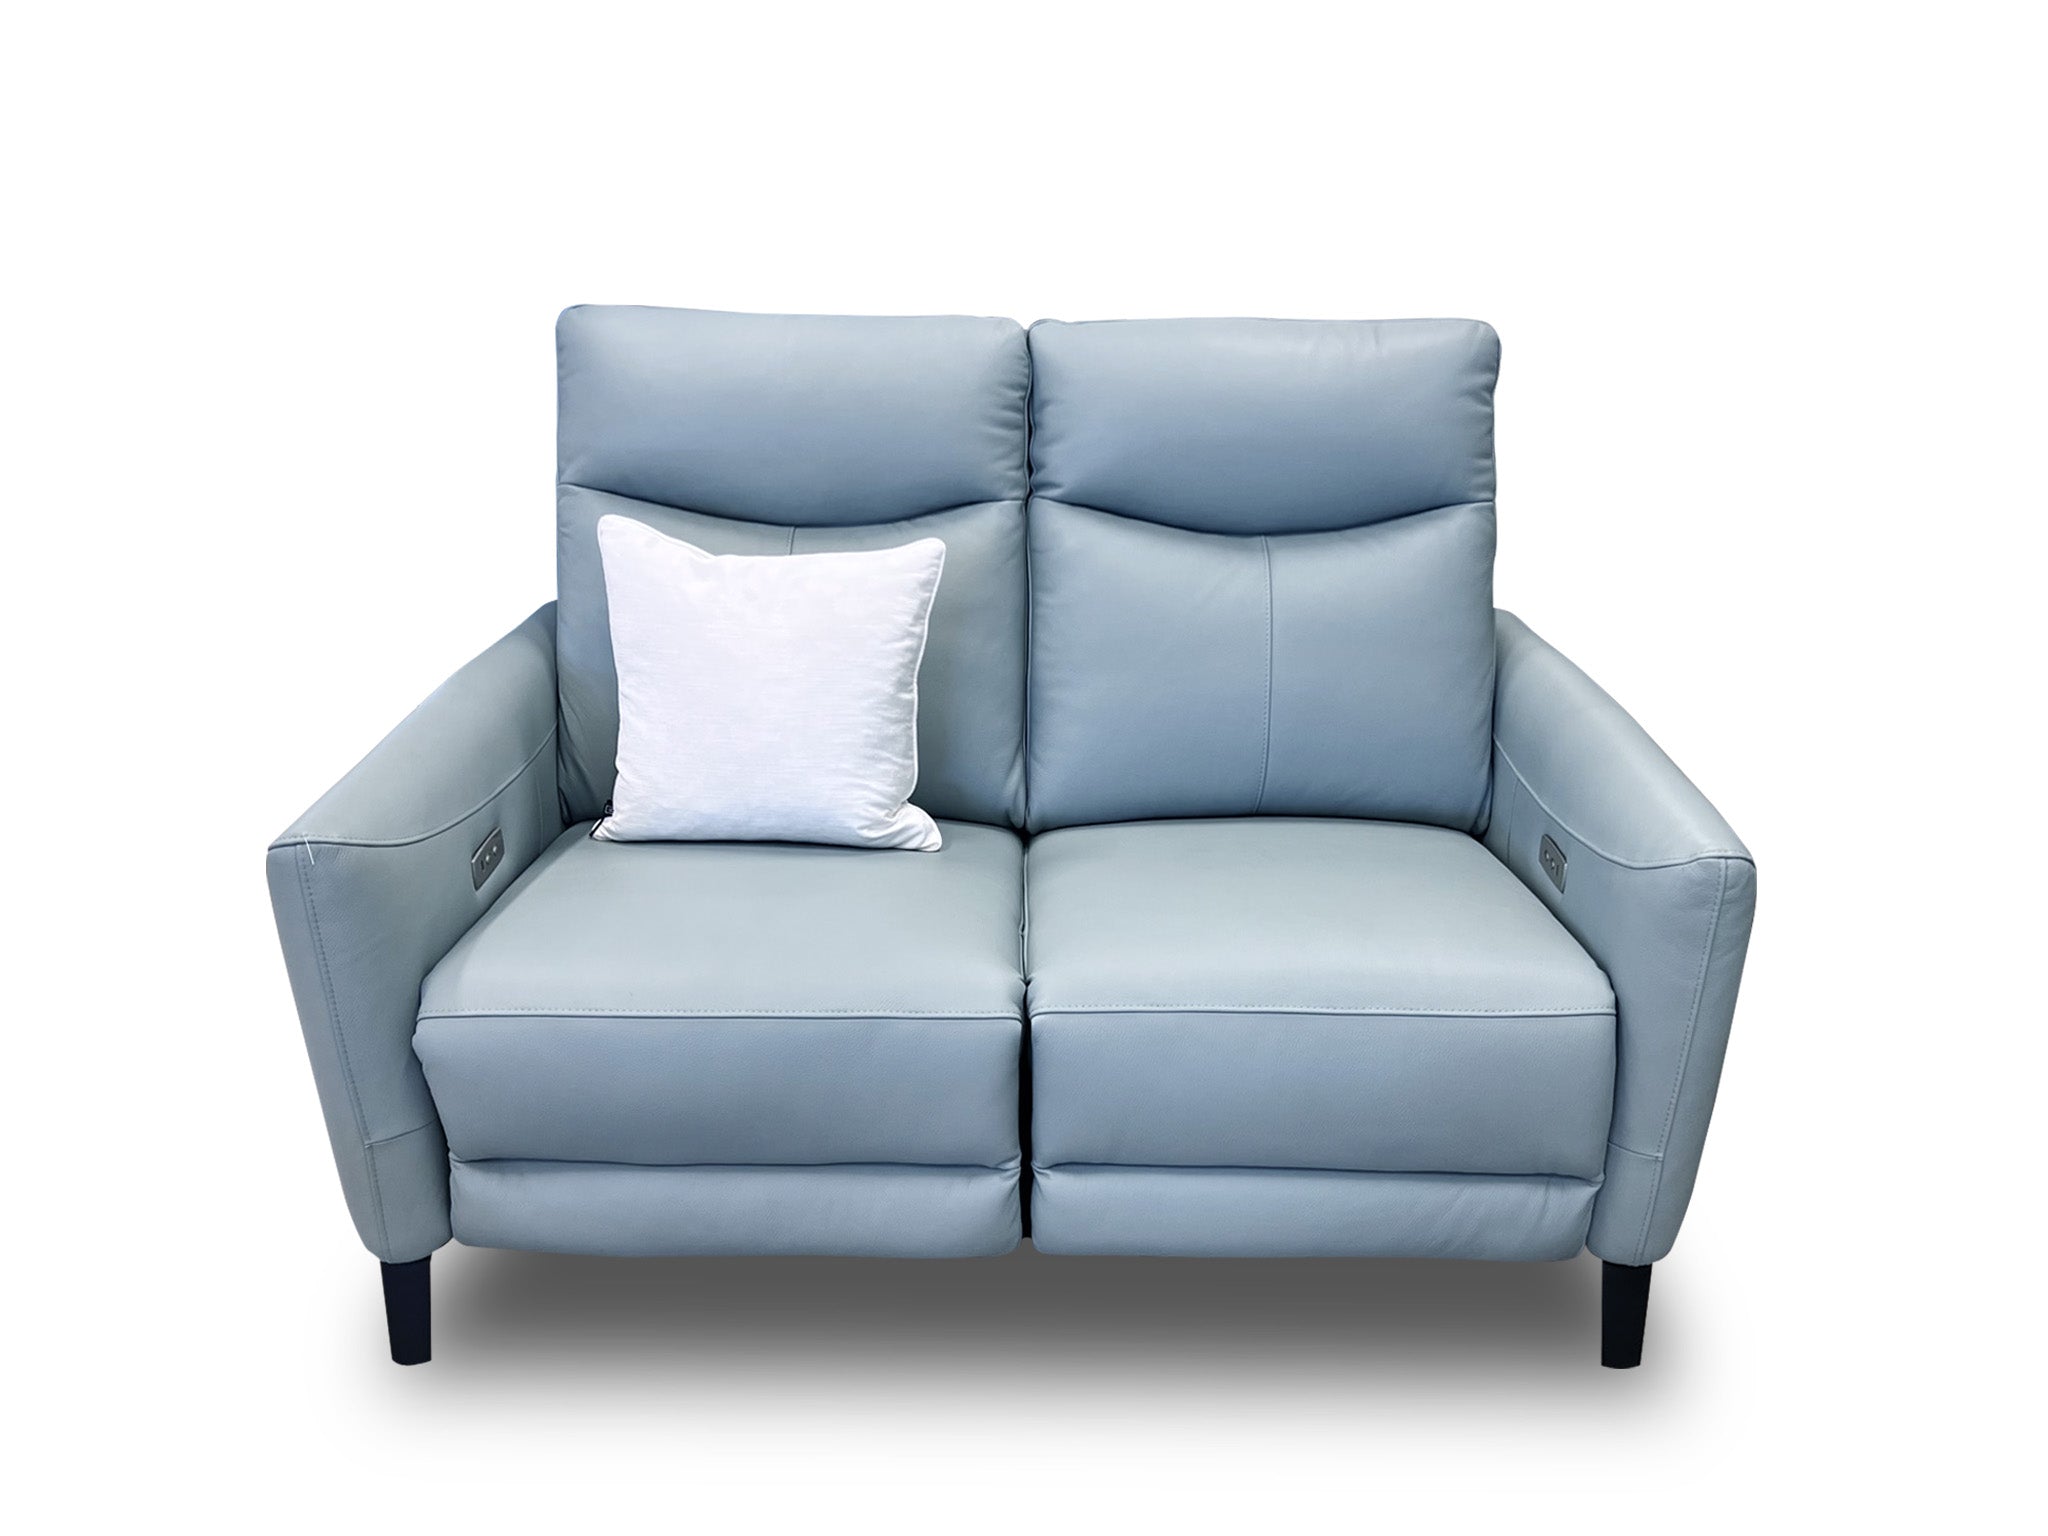 Oxford 2 Seater Recliner In Powder Blue